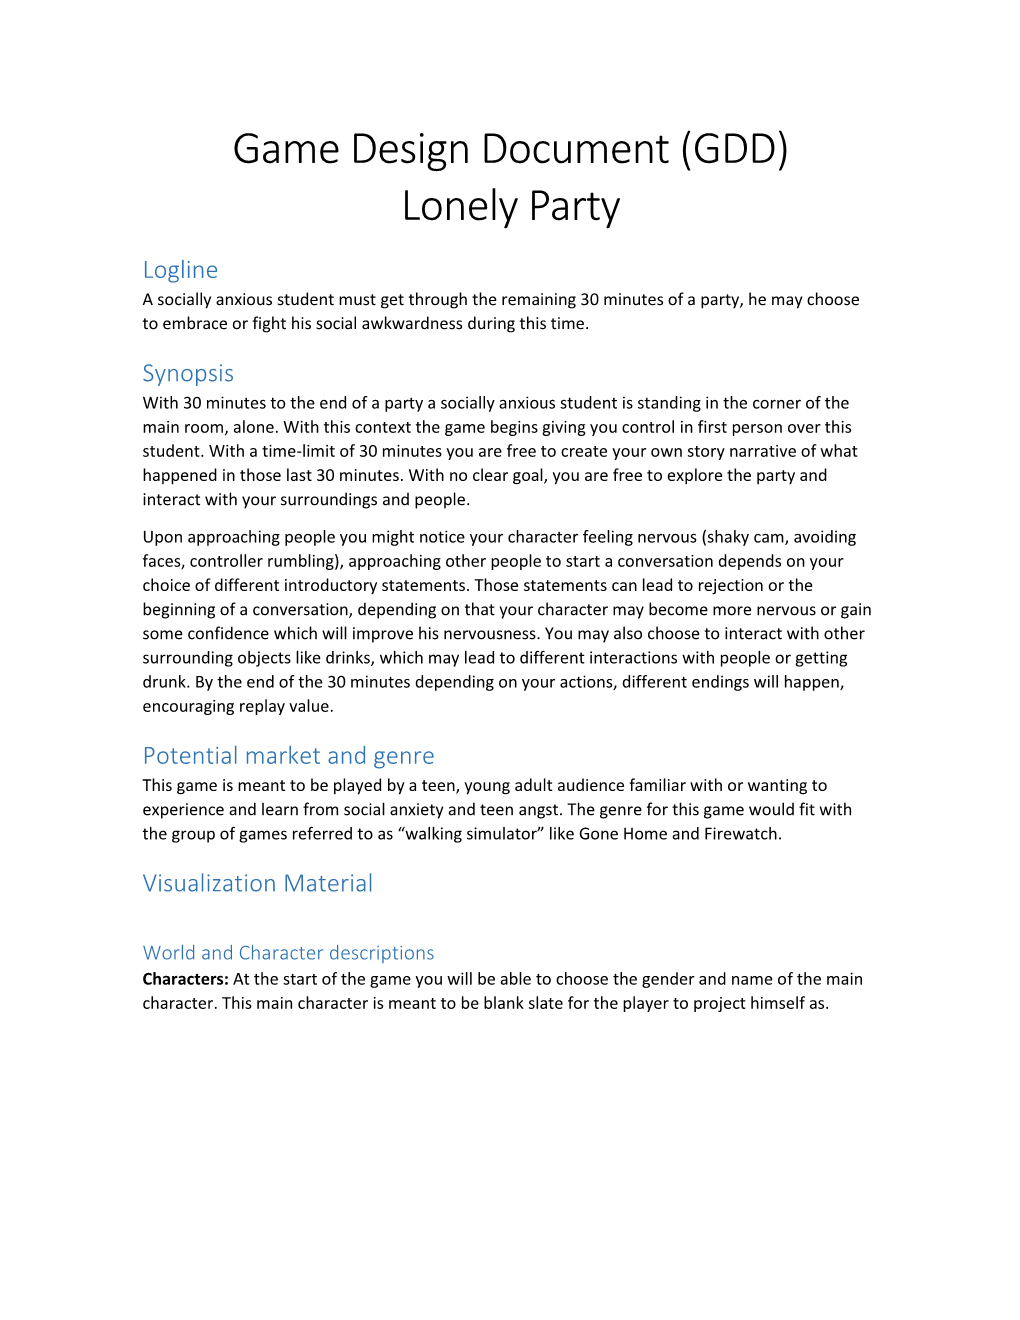 Game Design Document (GDD) Lonely Party